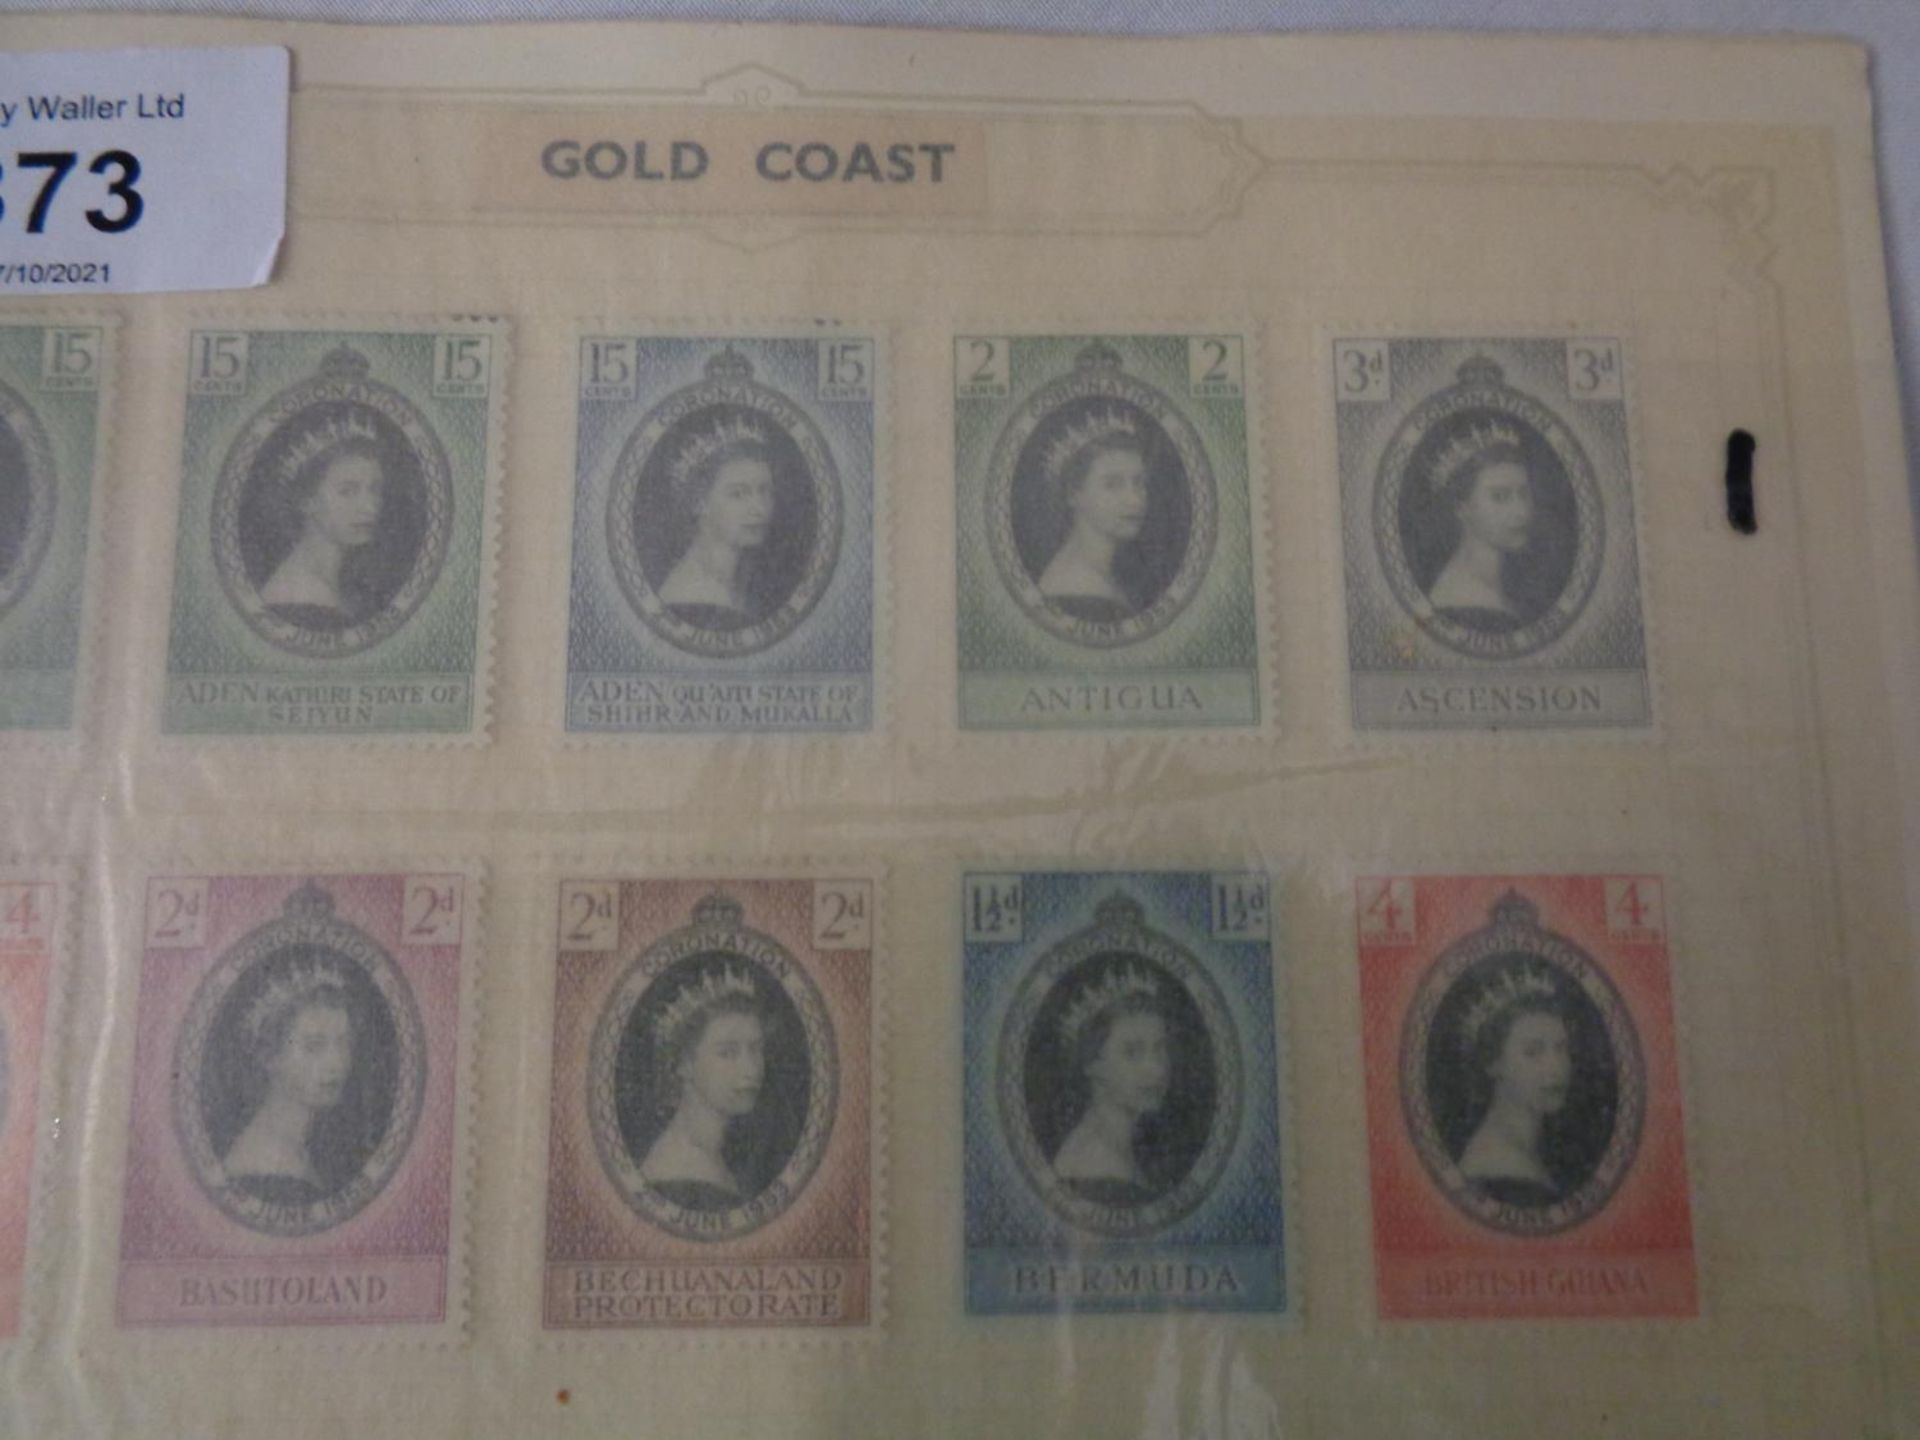 BRITISH COMMONWEALTH STAMPS , 1953 QE11 , CORONATION , A SELECTION OF 61 CROWN COLONY ISSUES , - Image 2 of 2